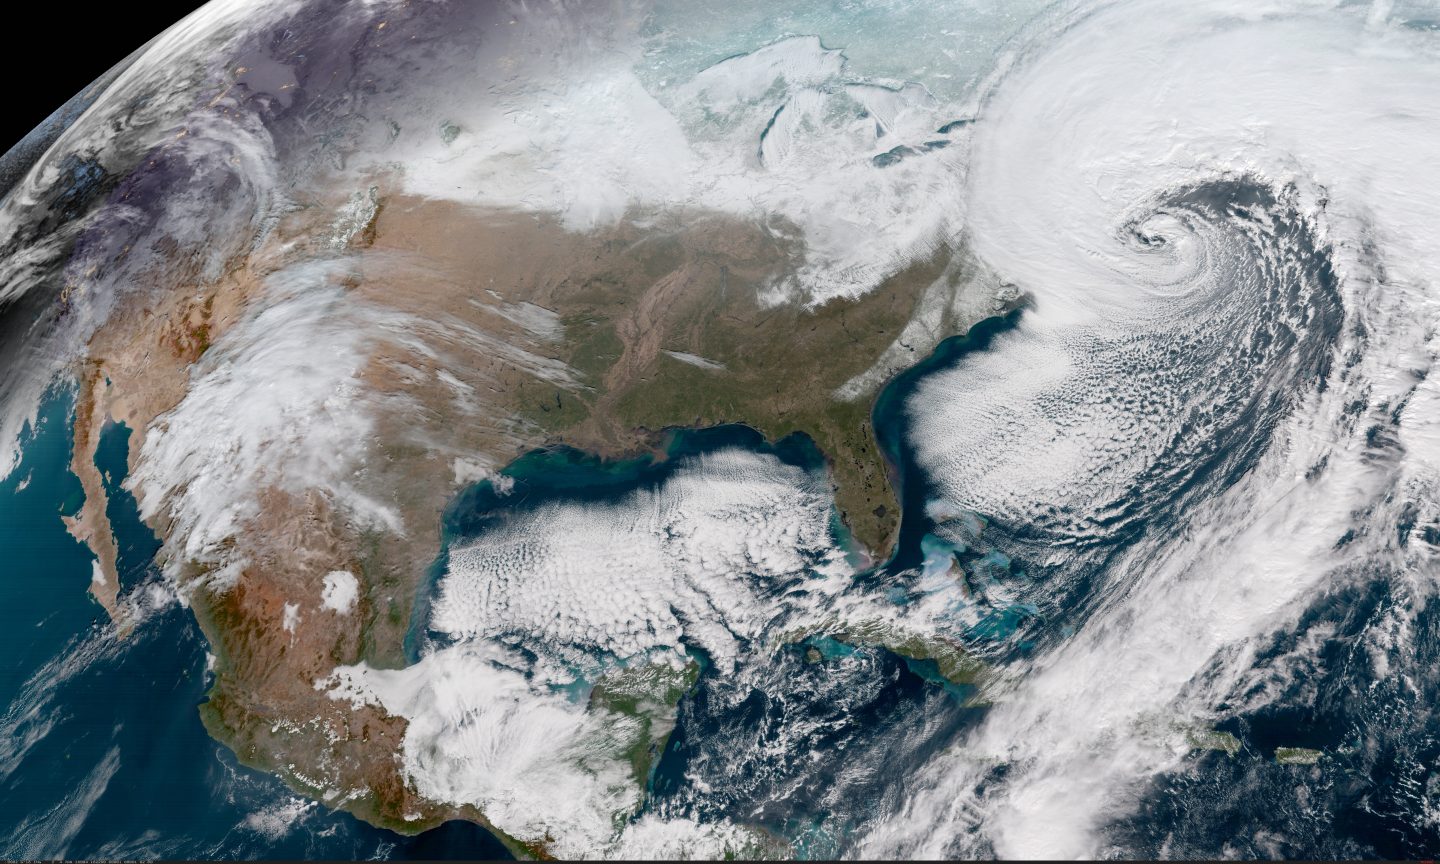 A powerful storm off the north-east coast of America on 4 January 2018.